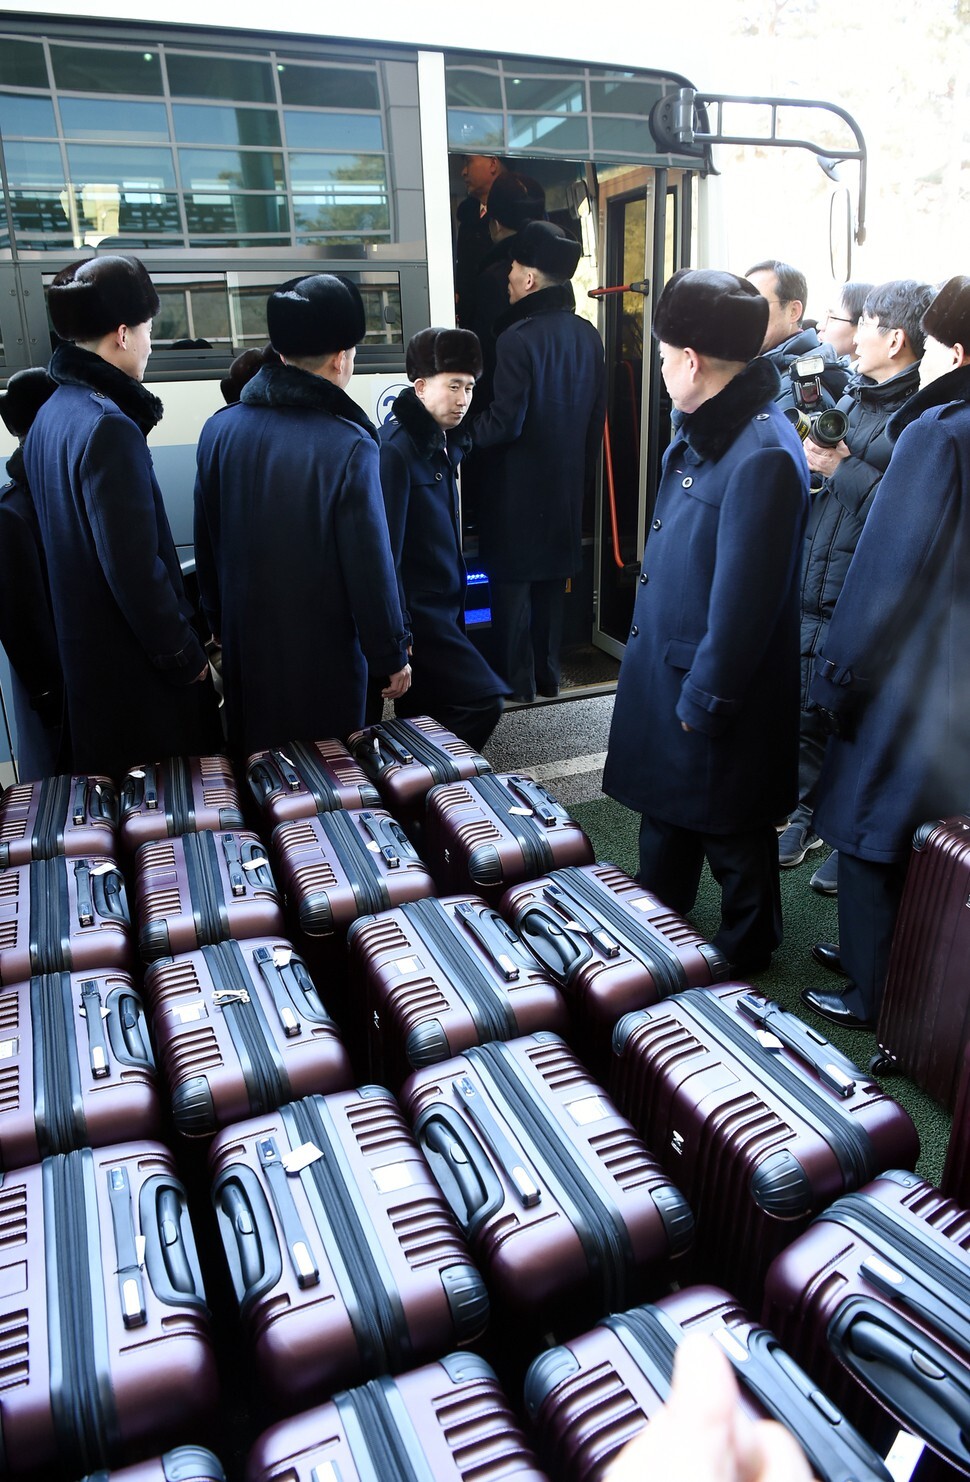 23 members of a North Korean performance group entered South Korea through the inter-Korean transit office in Paju